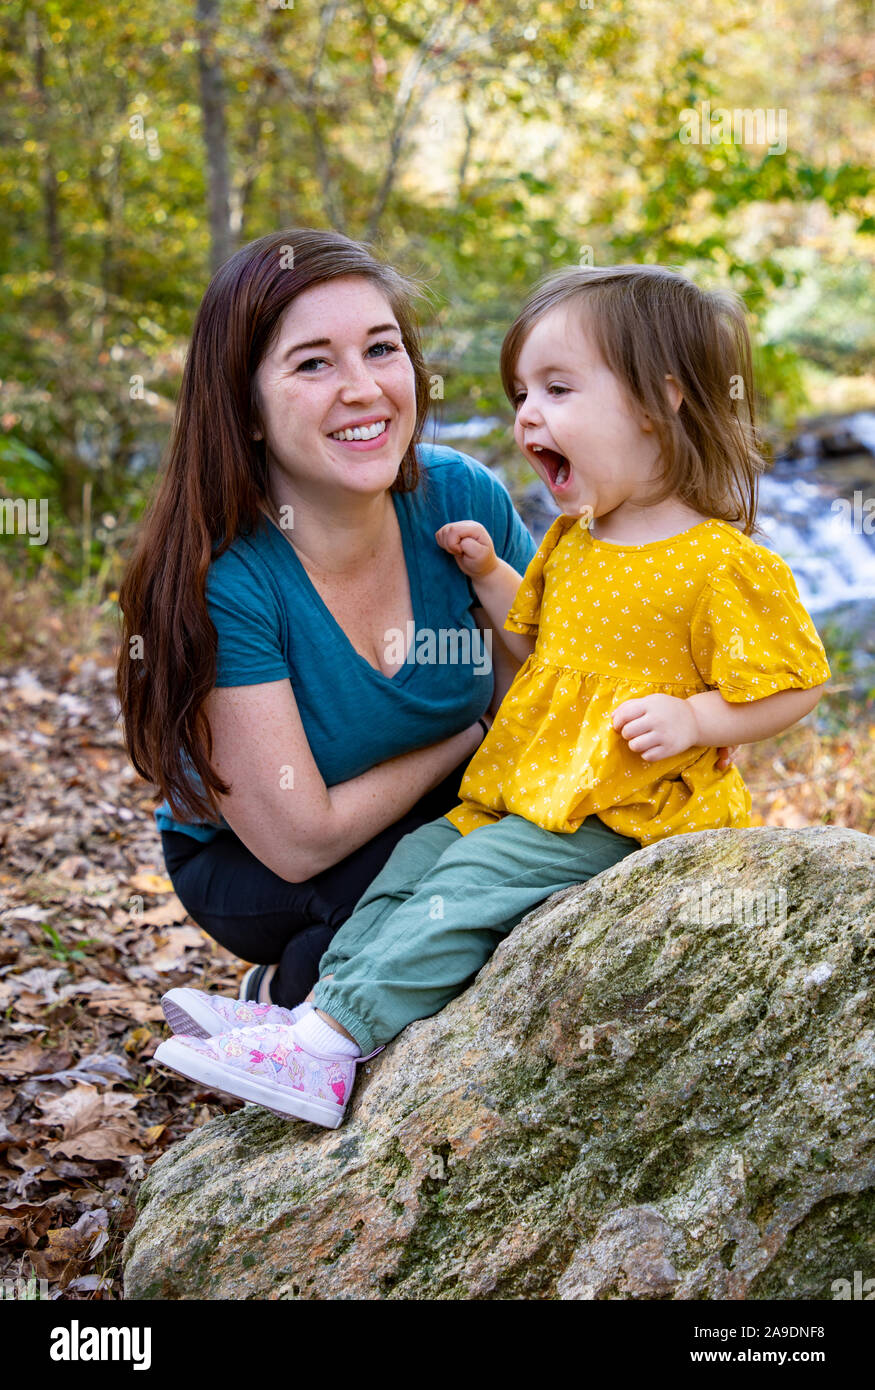 daughter being silly yelling at waterfall with mom still smiling Stock Photo